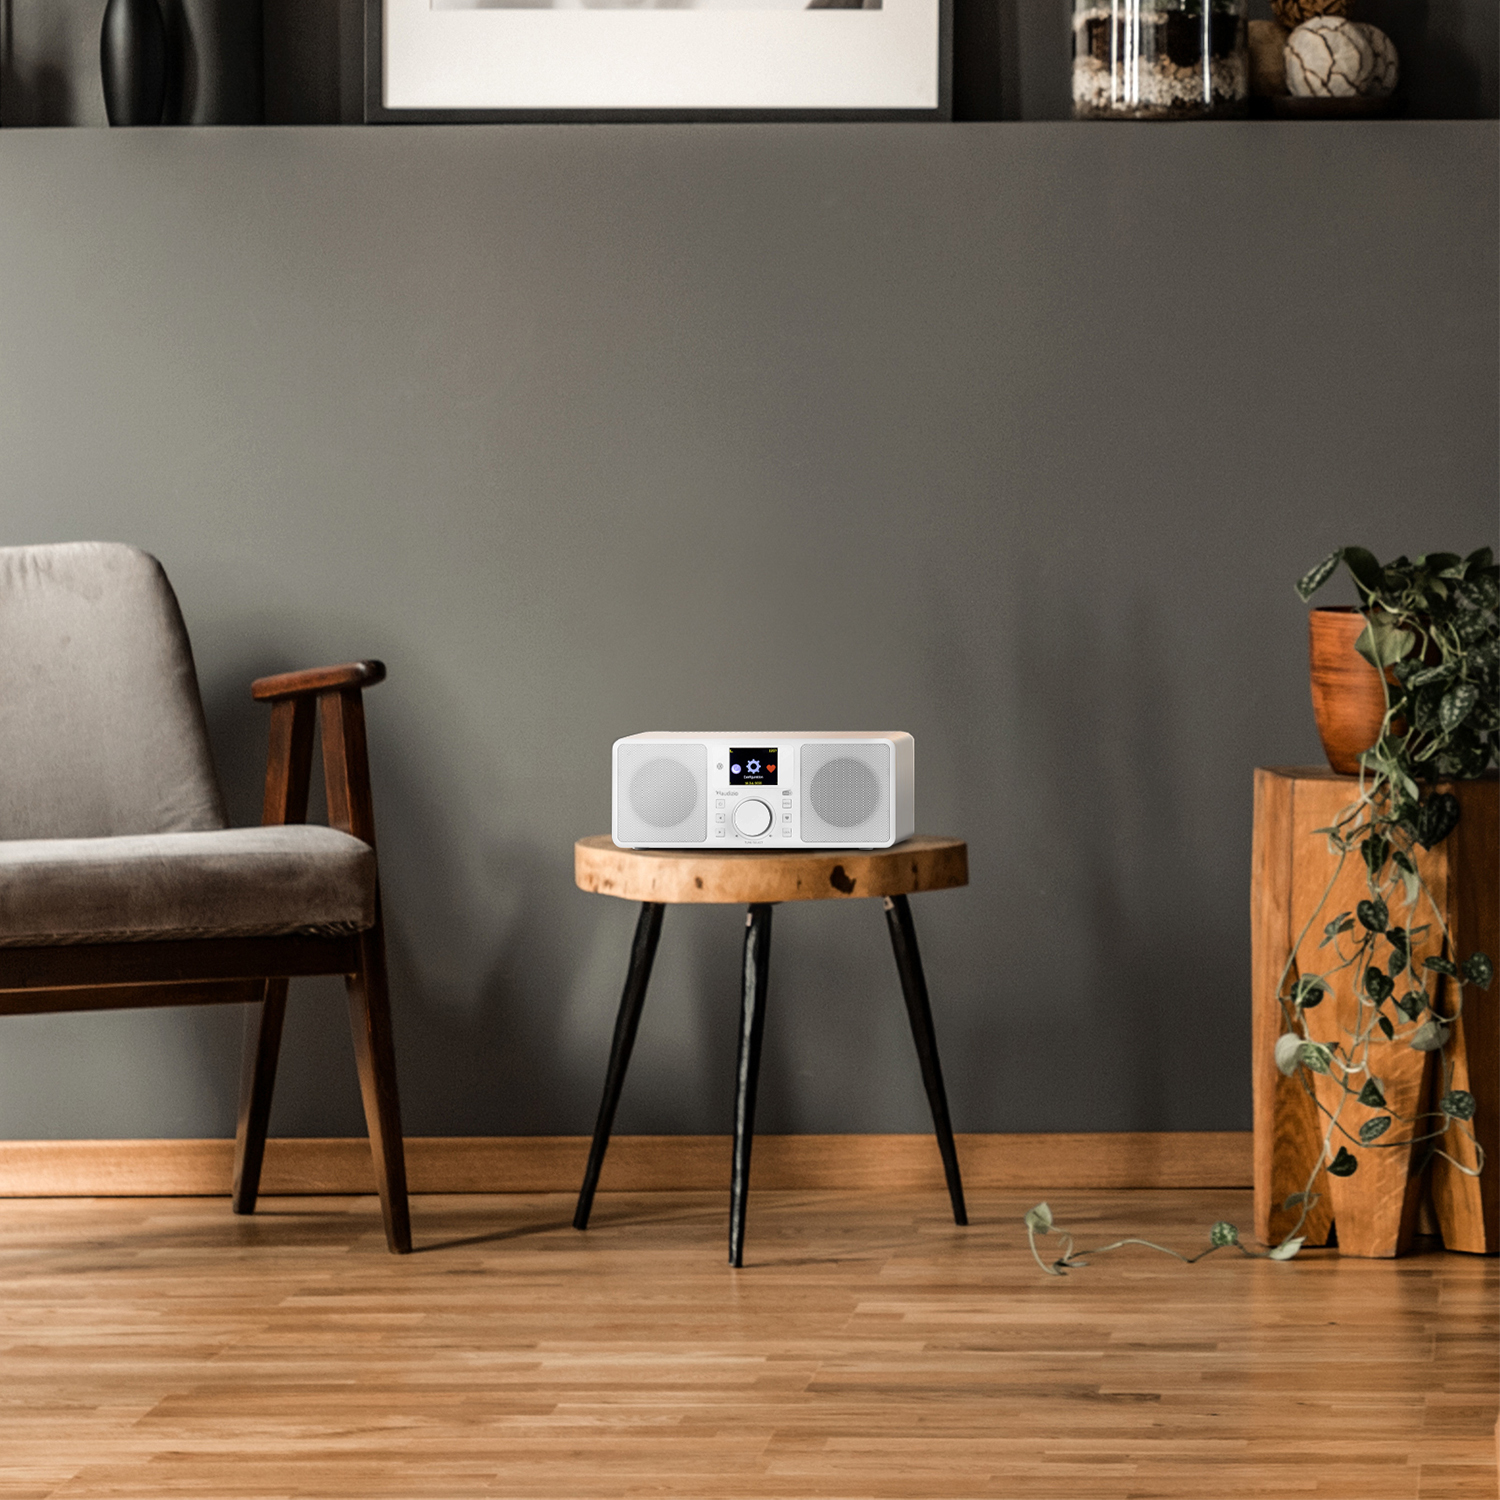 Bari WIFI Internet Stereo Radio with Wood 26,000 Worldwide Radio stations  available free! - Sound Division & Surplustronics